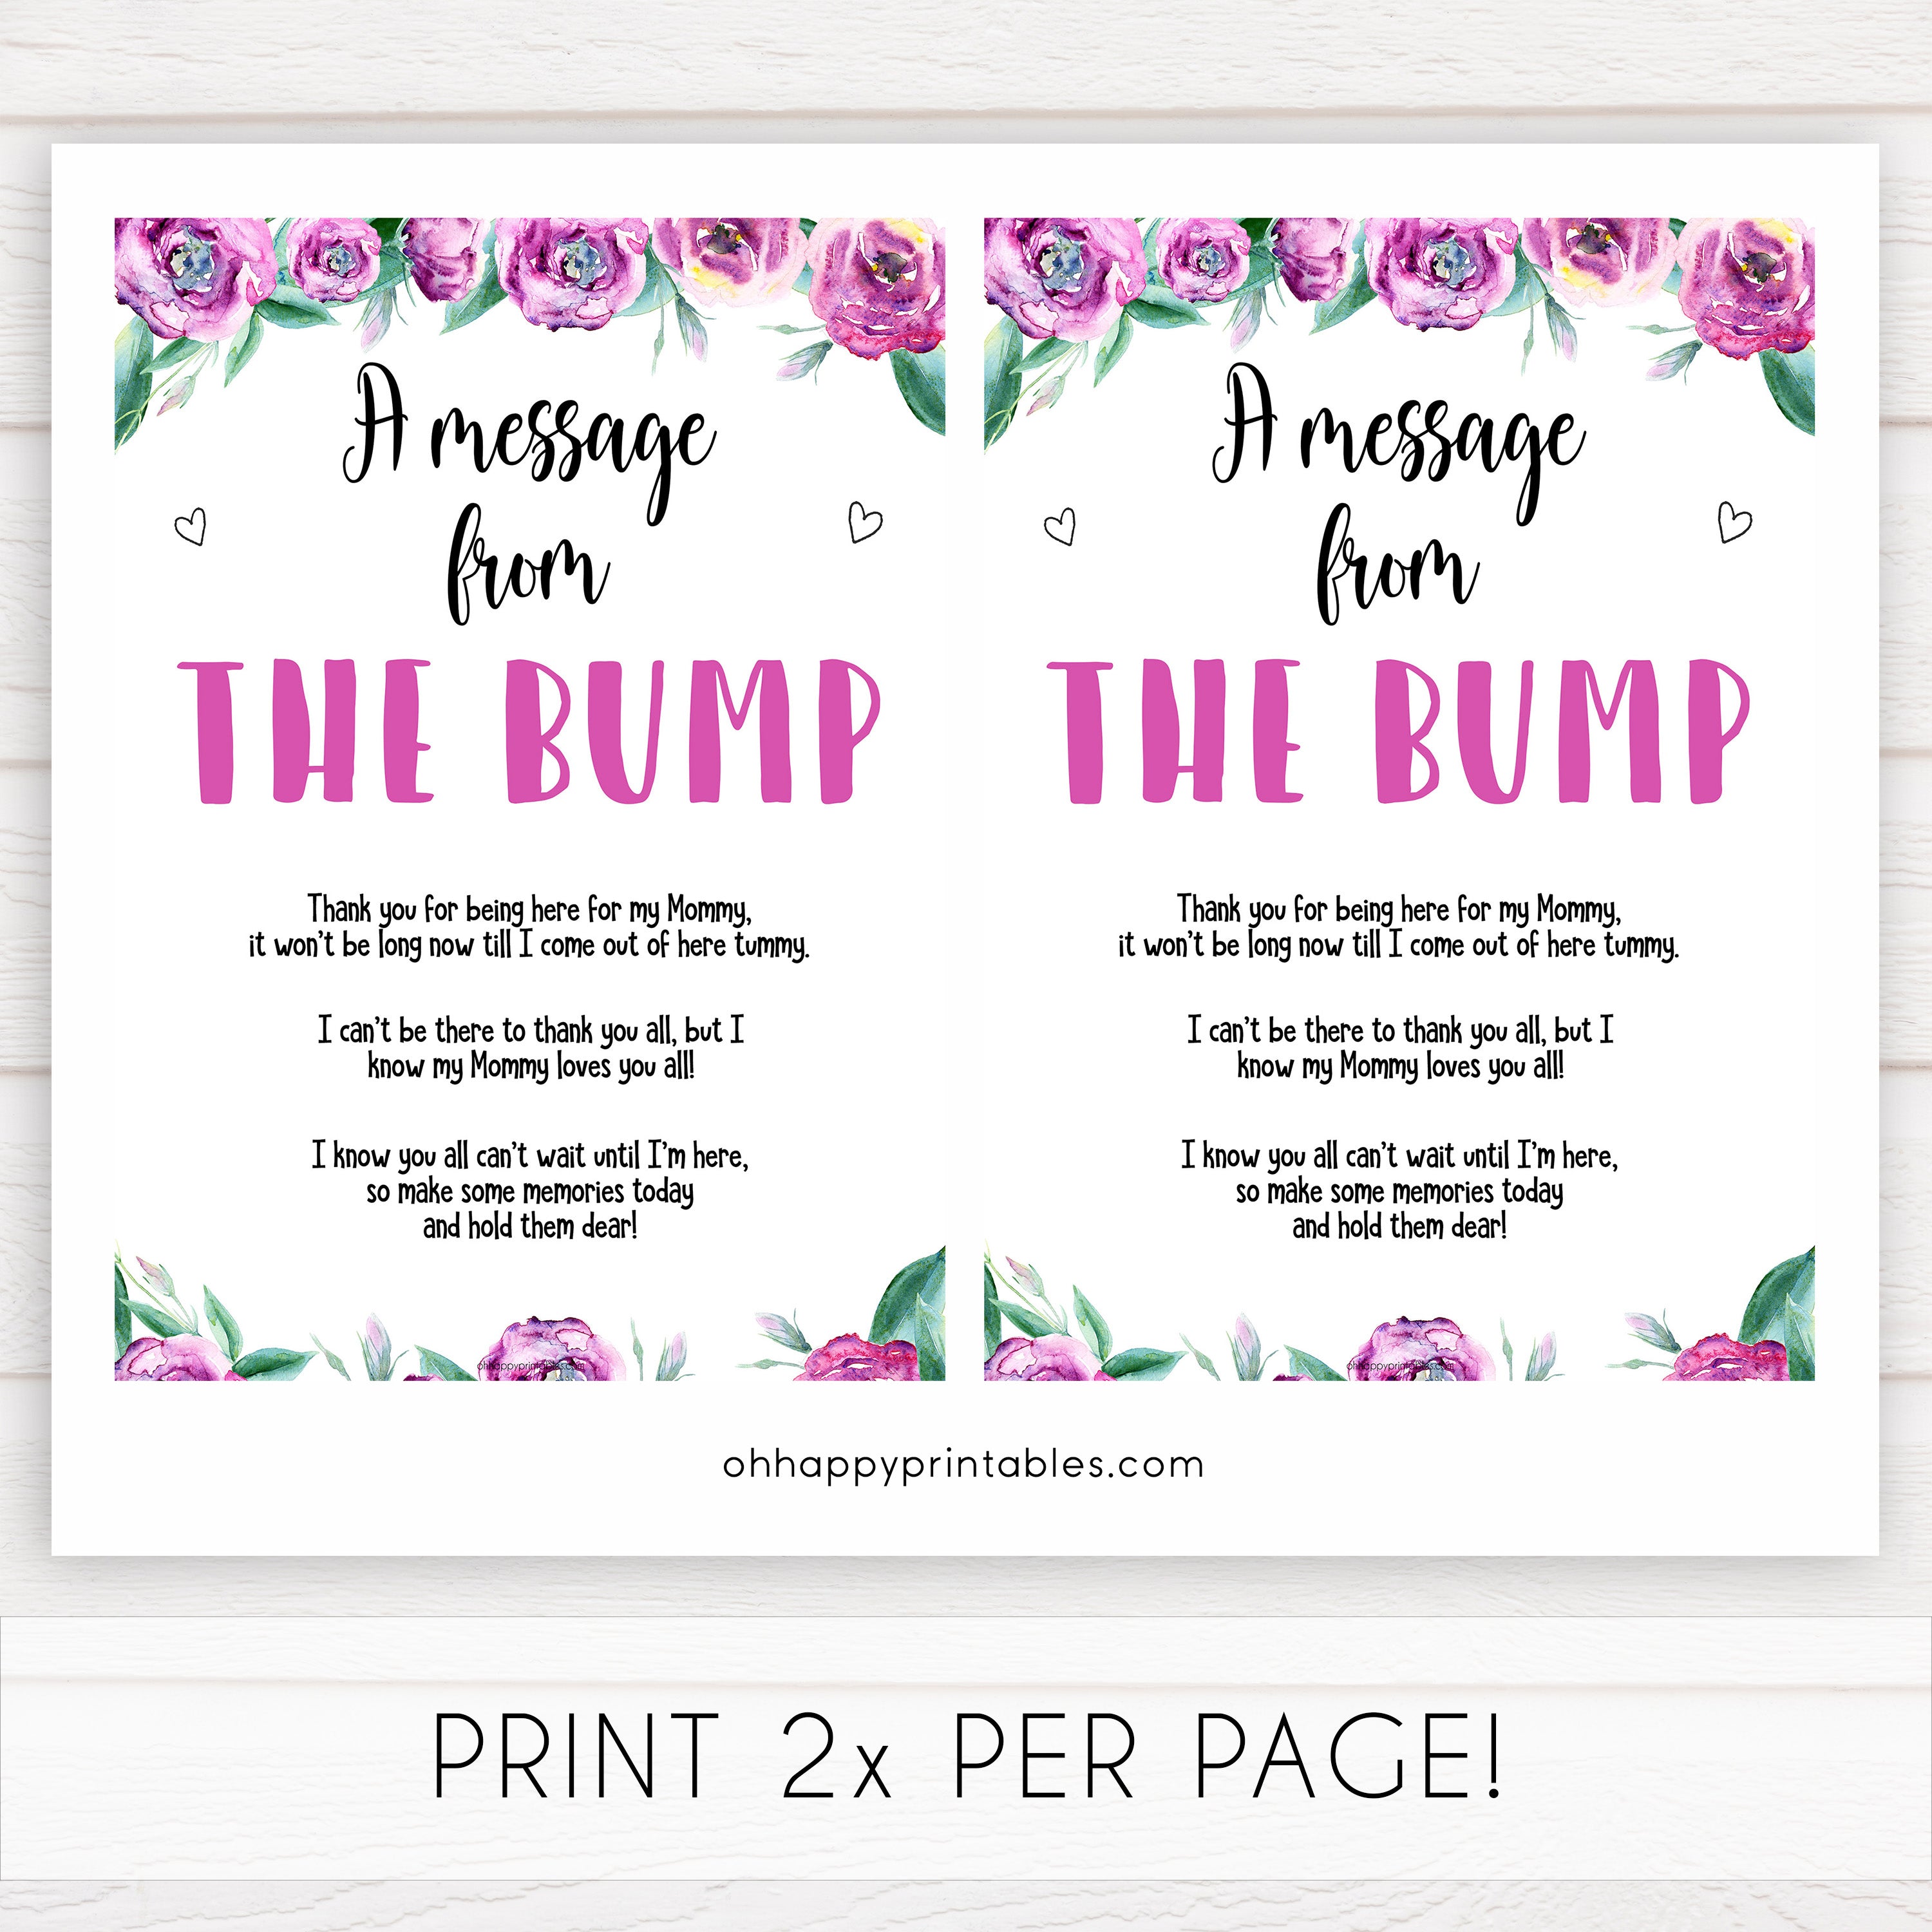 Purple peonies message from the bump baby shower games, printable baby shower games, fun baby shower games, baby shower games, popular baby shower games, floral baby shower games, purple baby shower themes